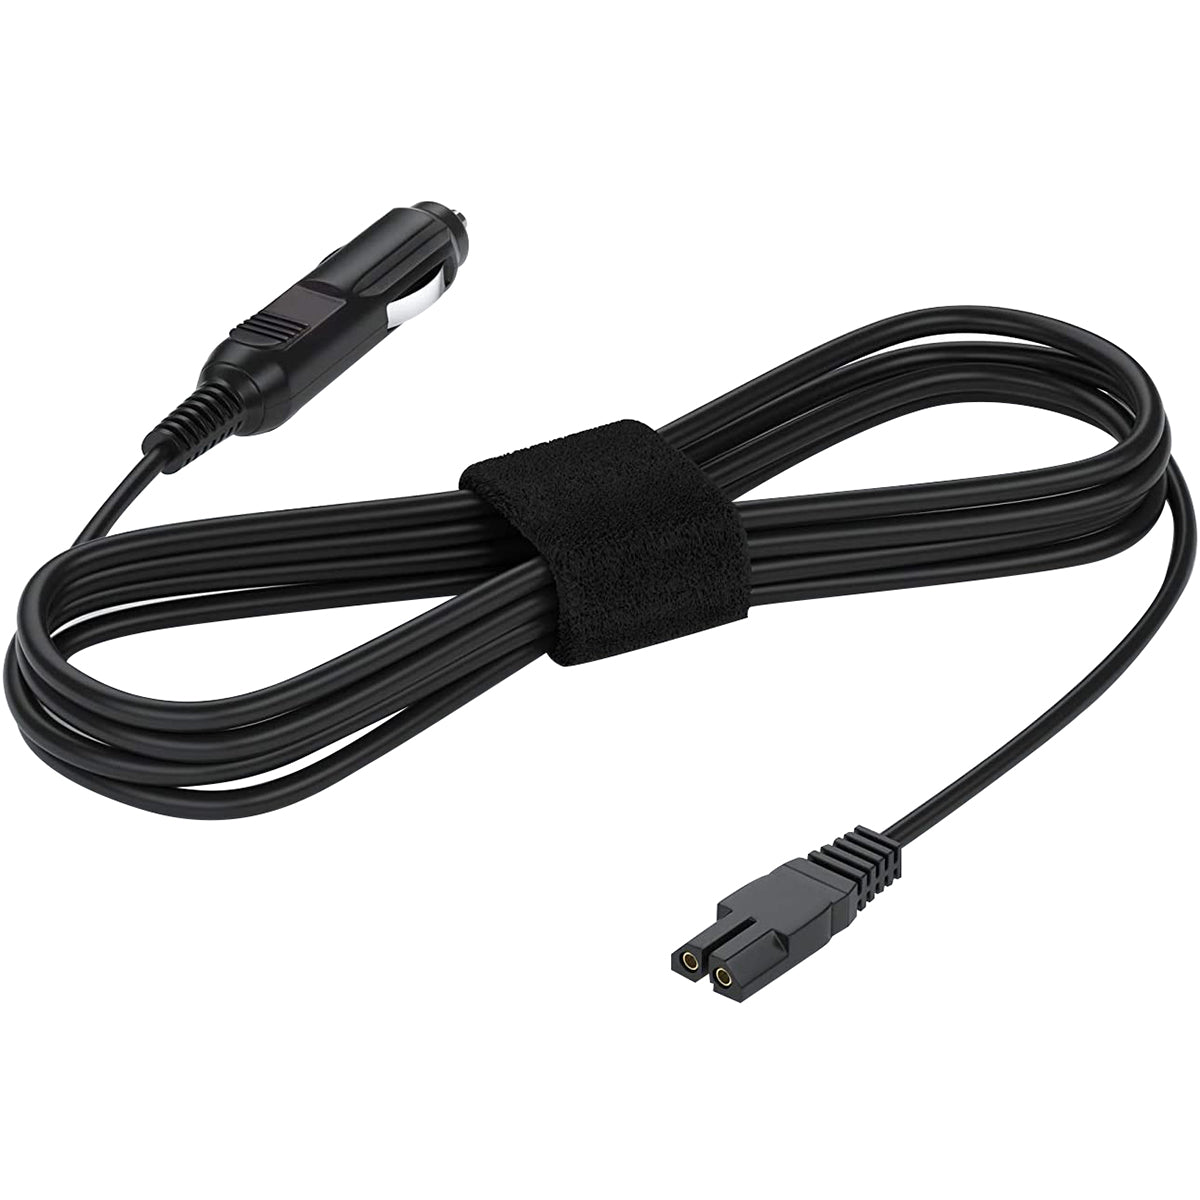 IGLOO 12V DC Power Cord for Thermal Electric Coolers IGLOO